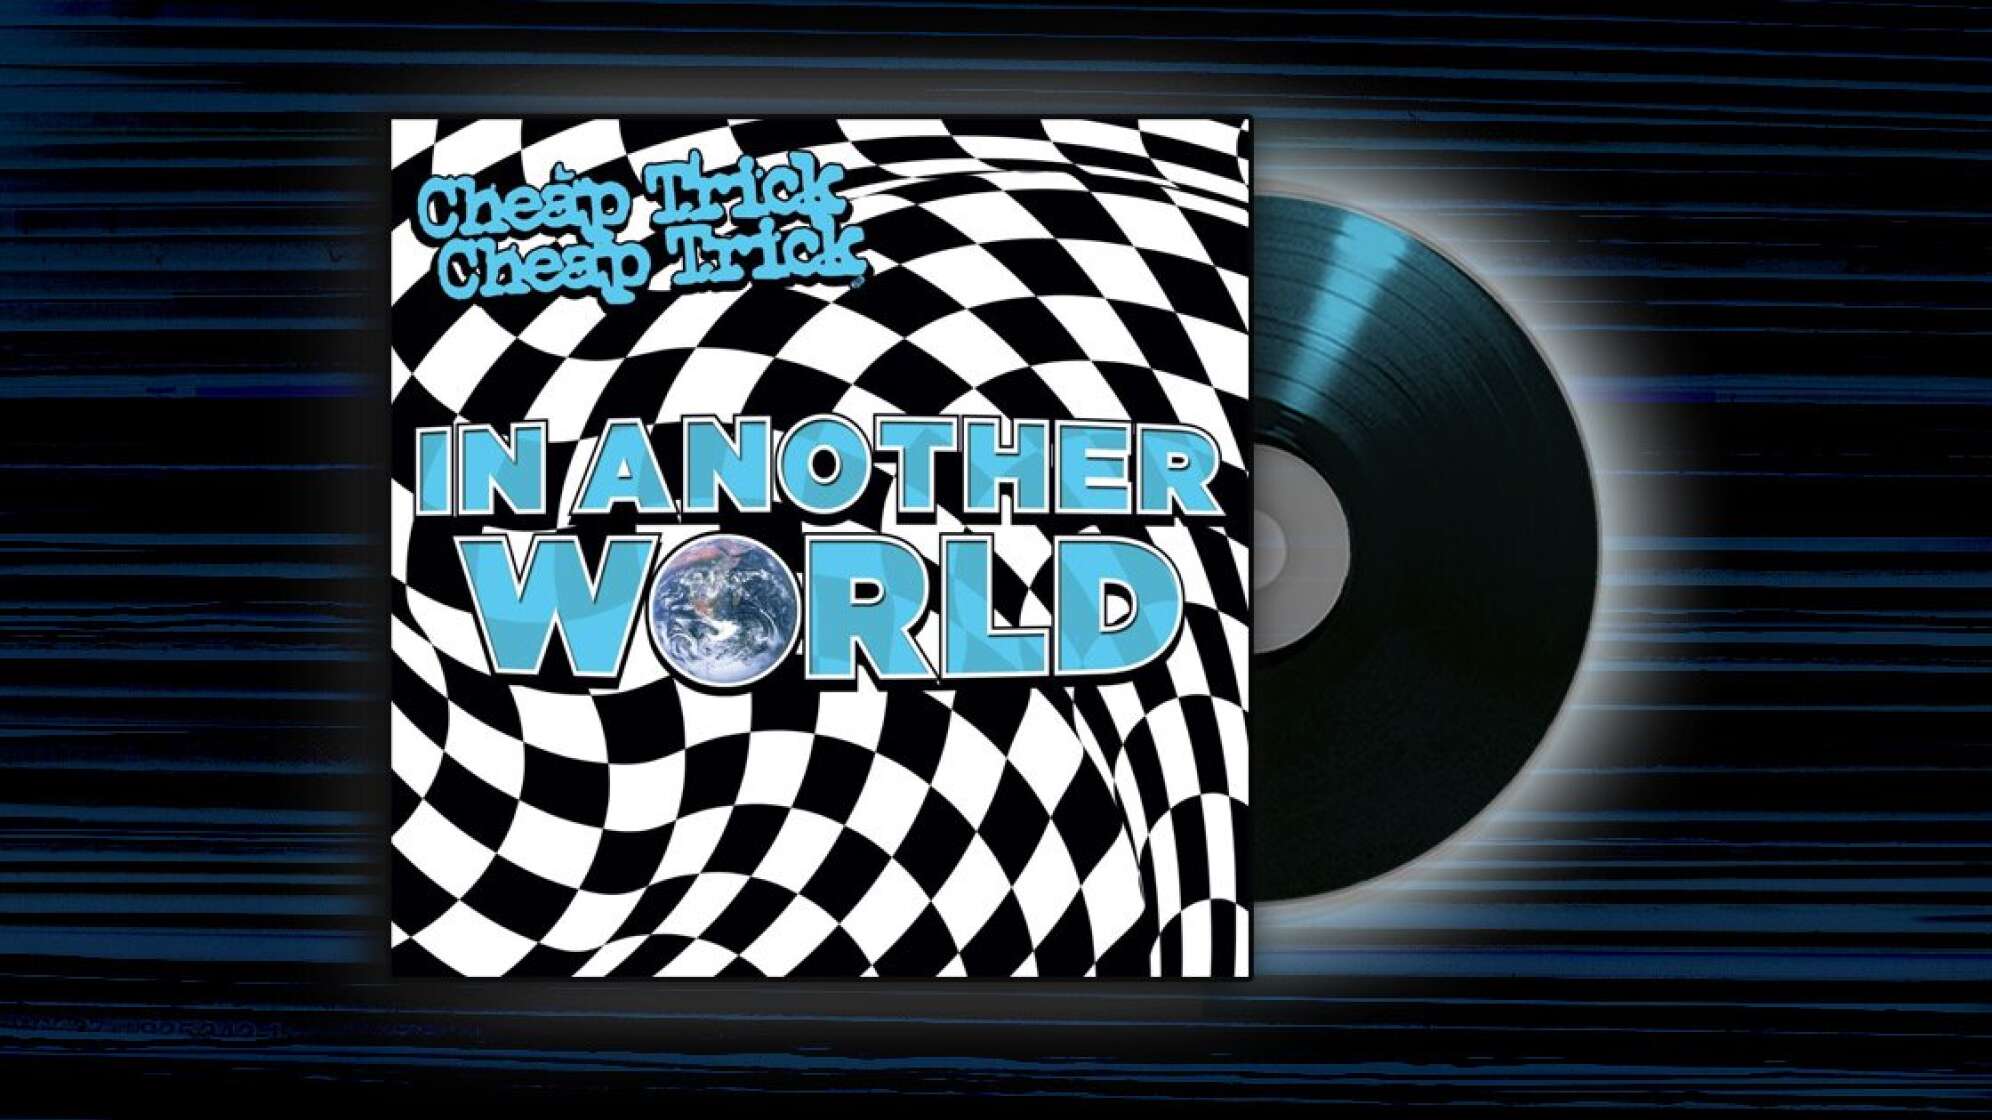 Album-Cover: Cheap Trick - In Another World